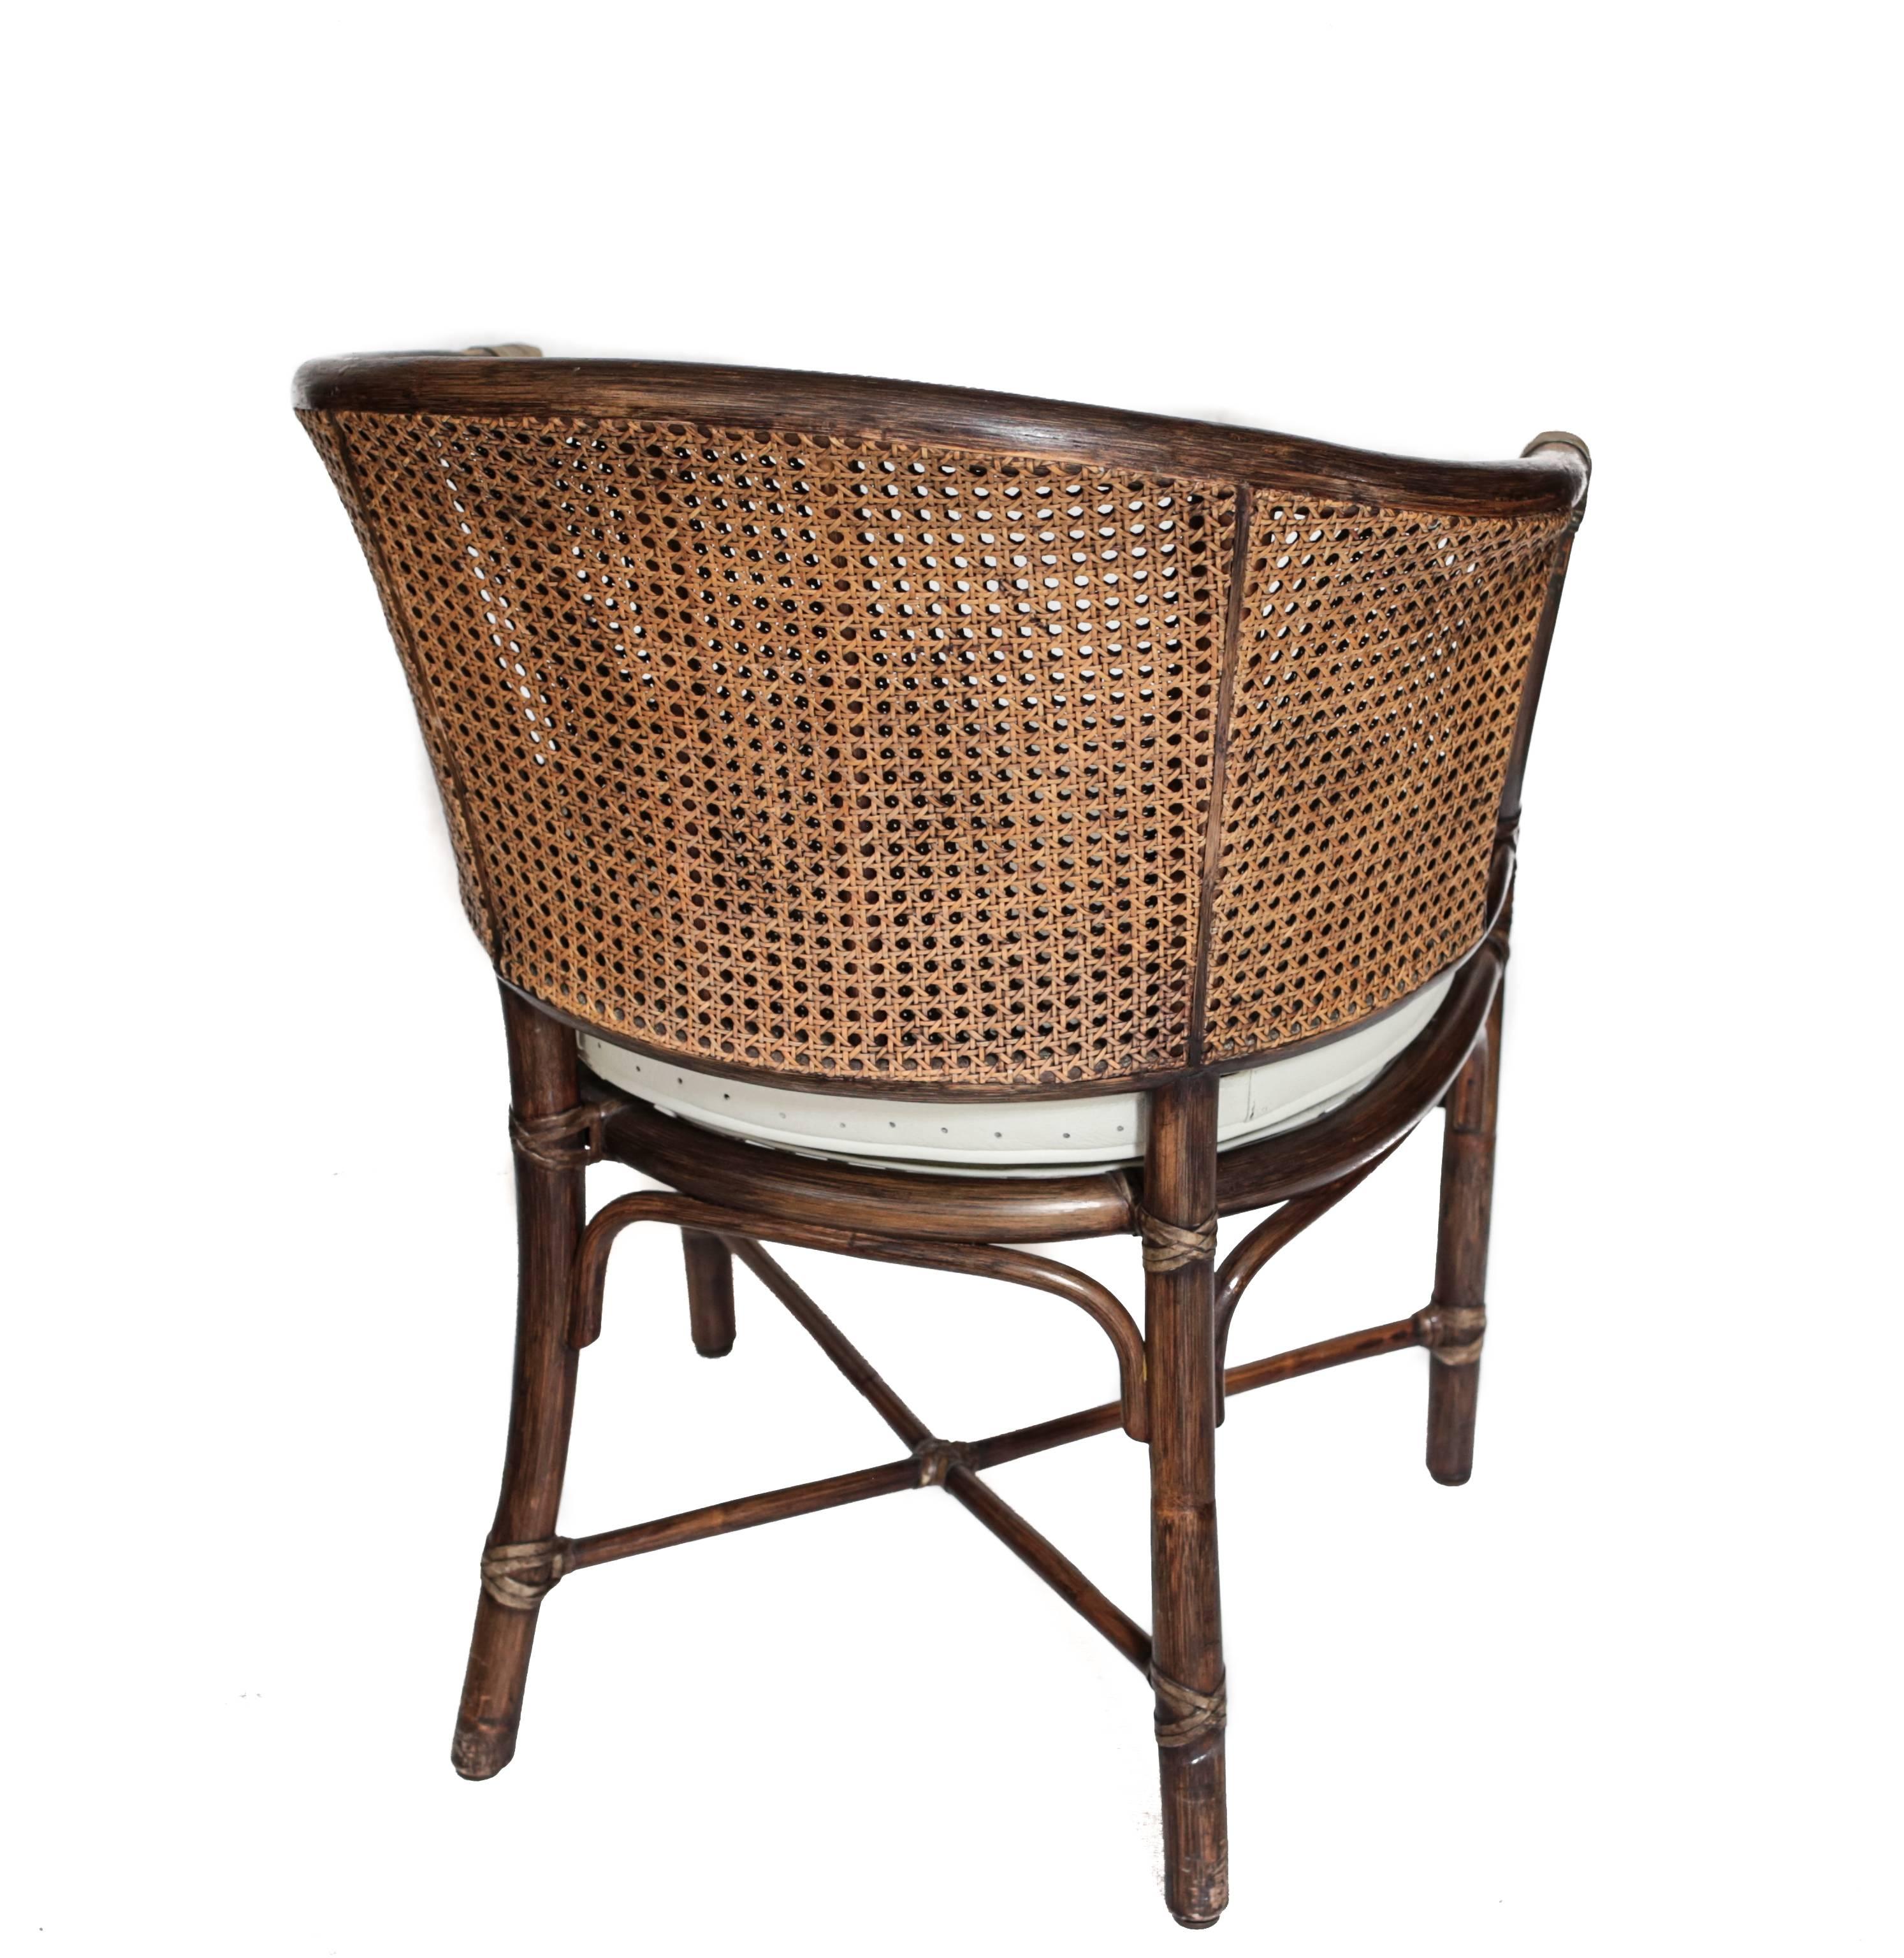 American Vintage Bamboo and Rattan Table and Chairs by McGuire